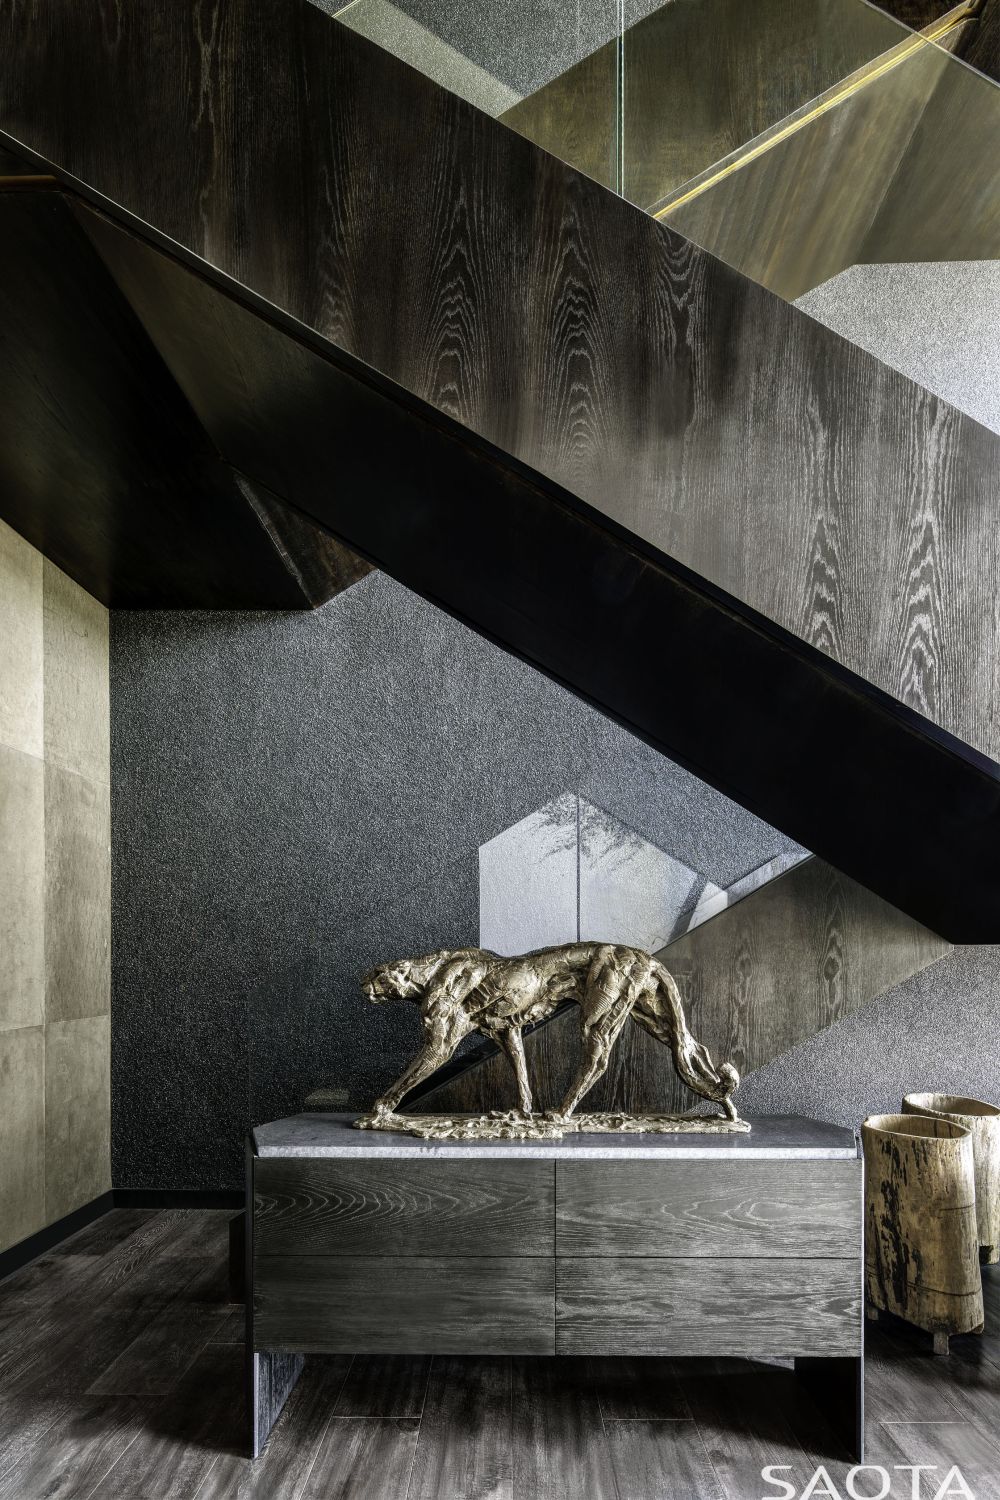 The connection between all the floors within the house is ensured by a simple and elegant staircase